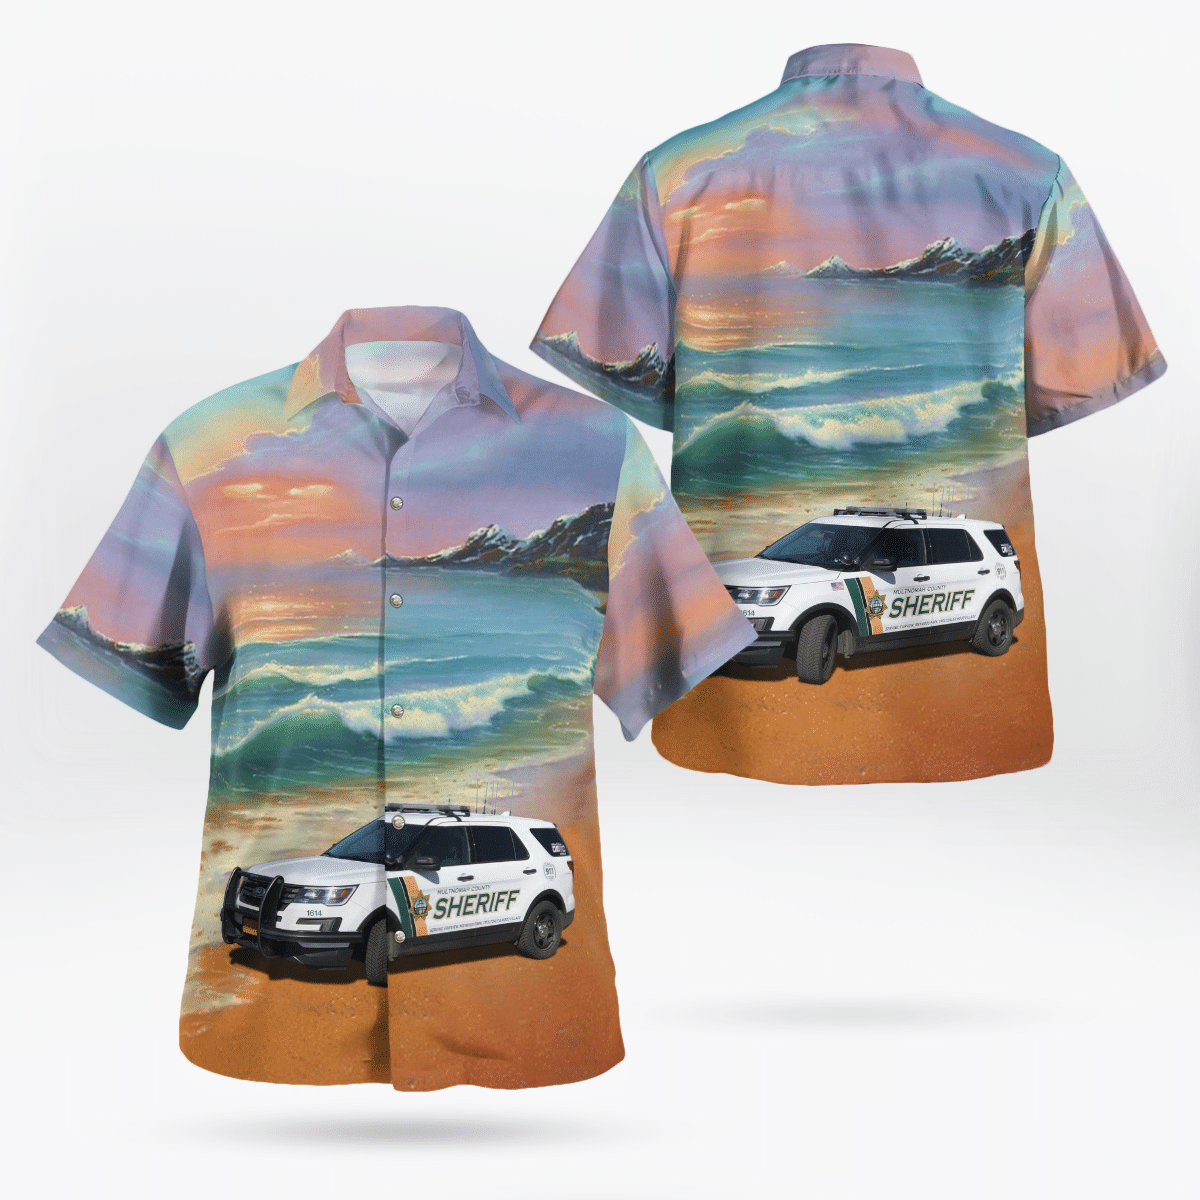 If you are in need of a new summertime look, pick up this Hawaiian shirt 75